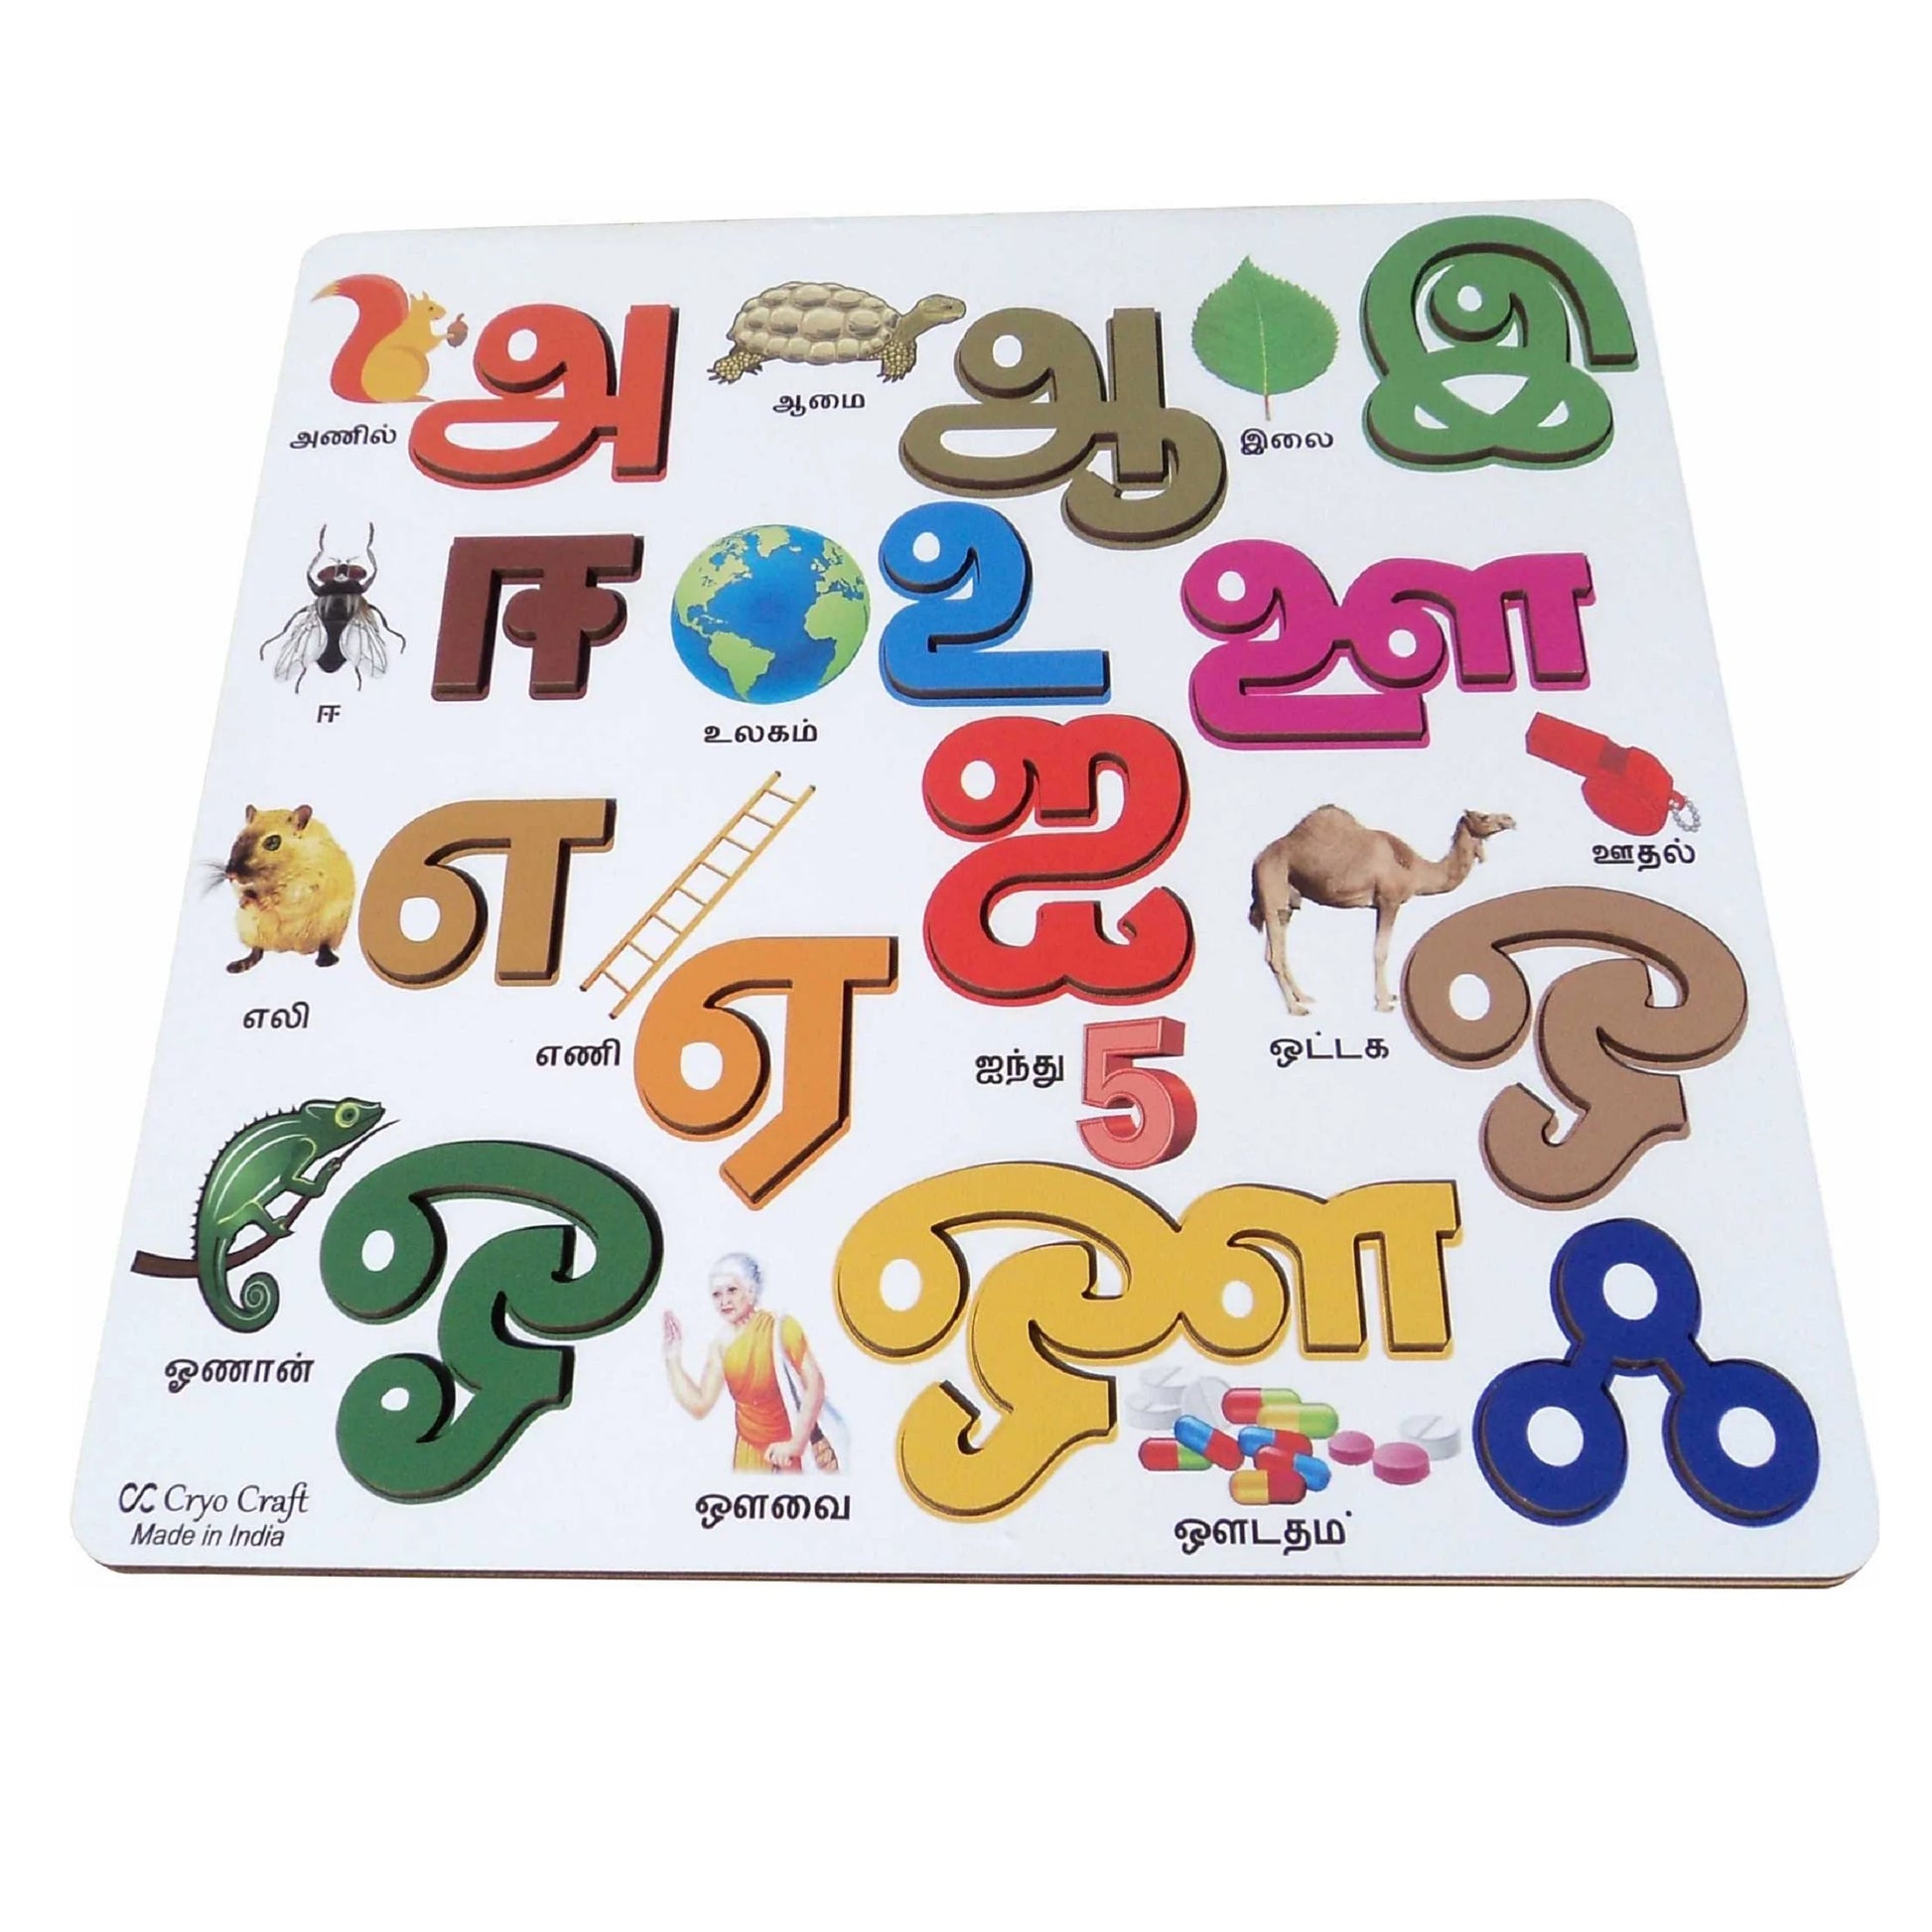 Buy Wooden Tamil Alphabet Puzzle Board with Picture - Vowels - SkilloToys.com